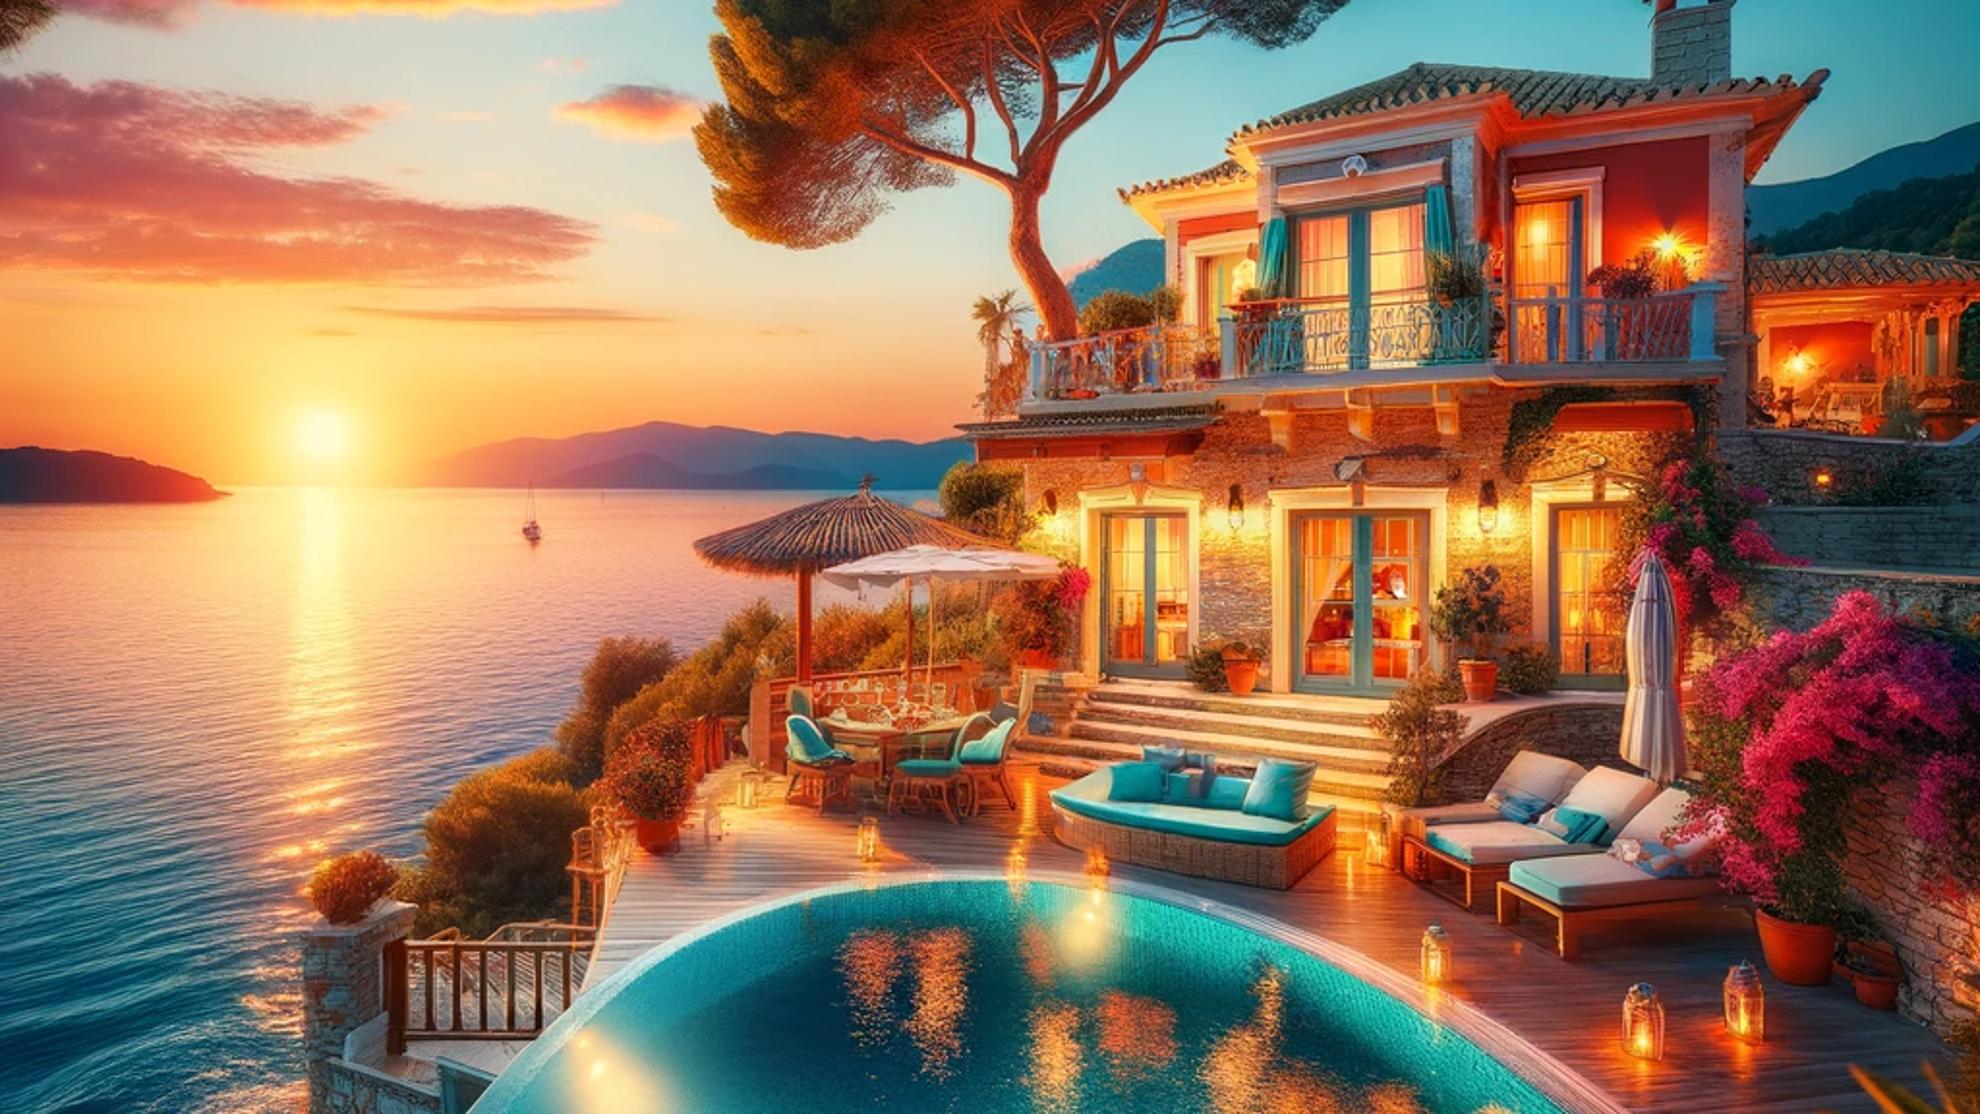 AI-Romantic-villa-in-Corfu-with-a-private-pool-overlooking-the-sunset in halikounas